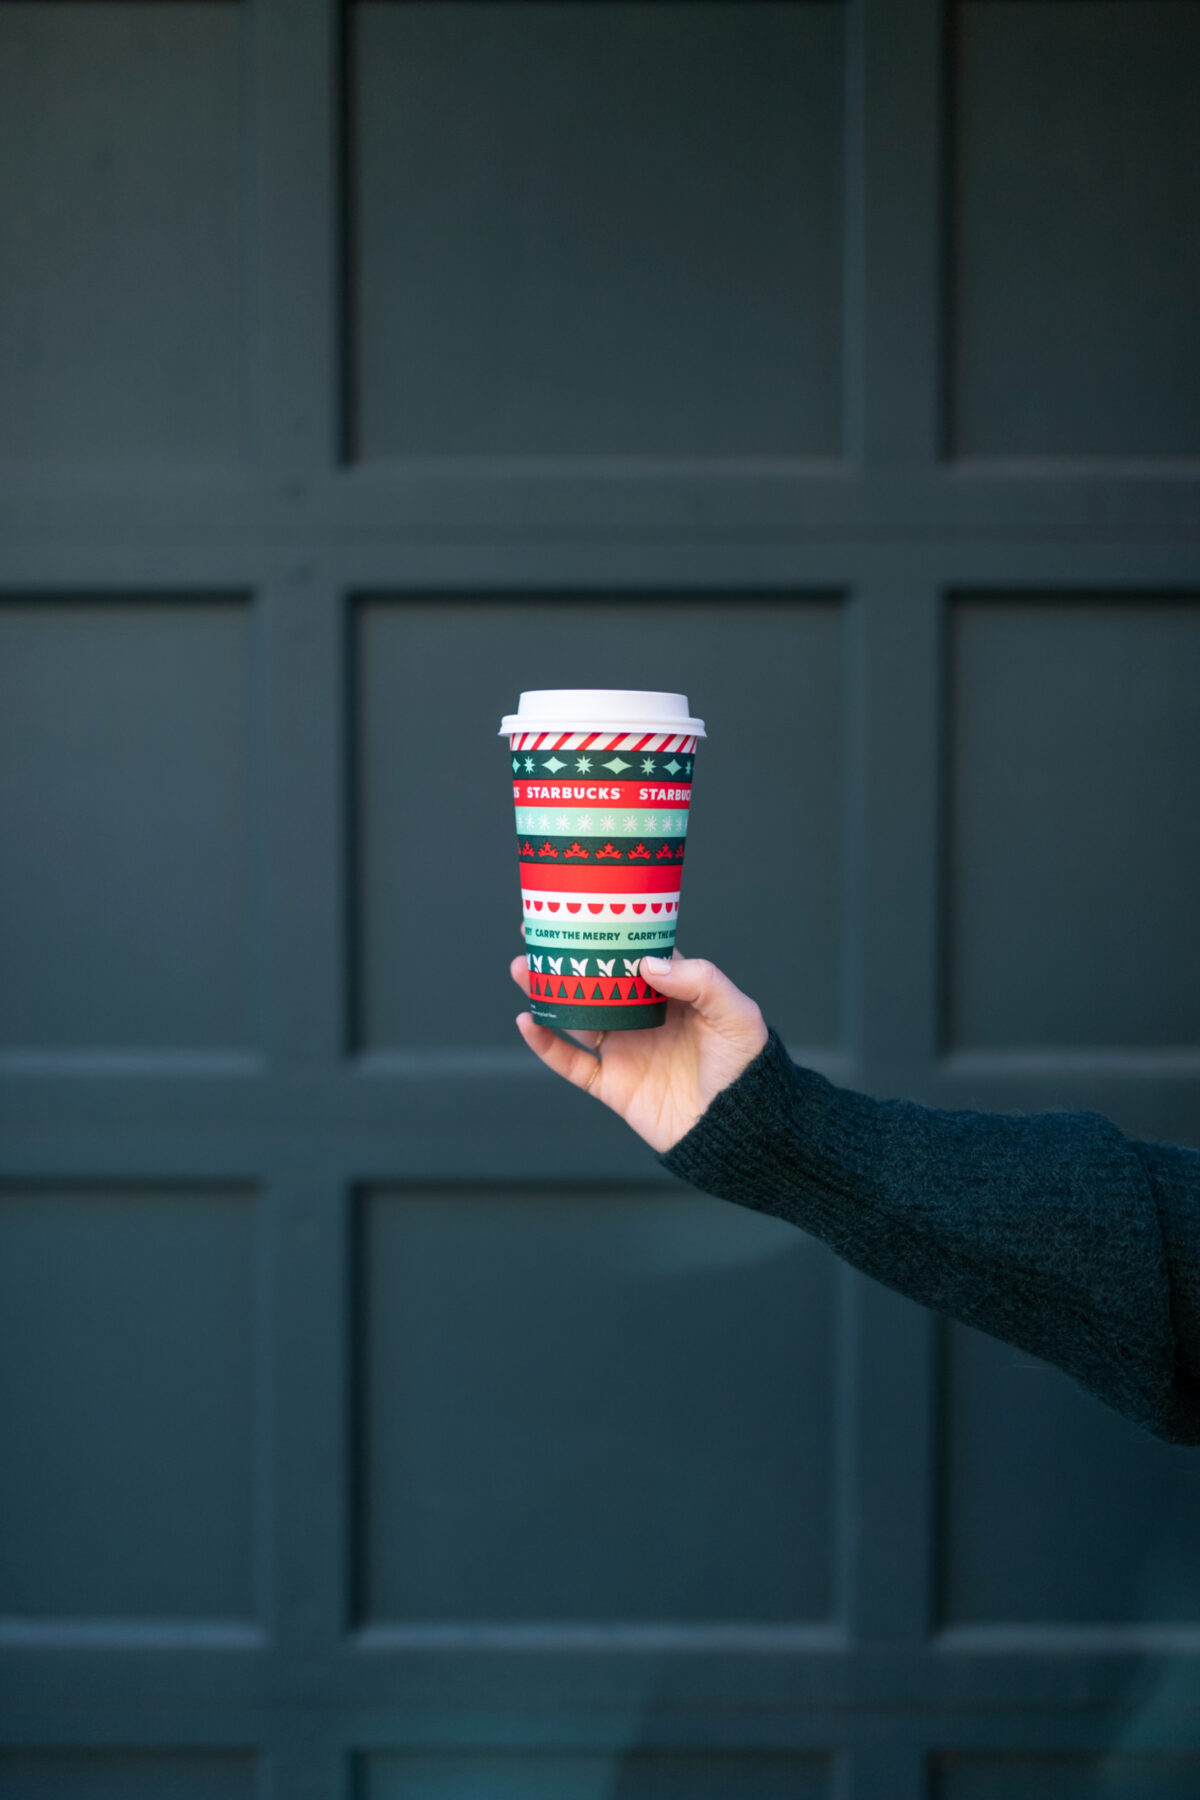 Starbucks Holiday Cup I wit & whimsy